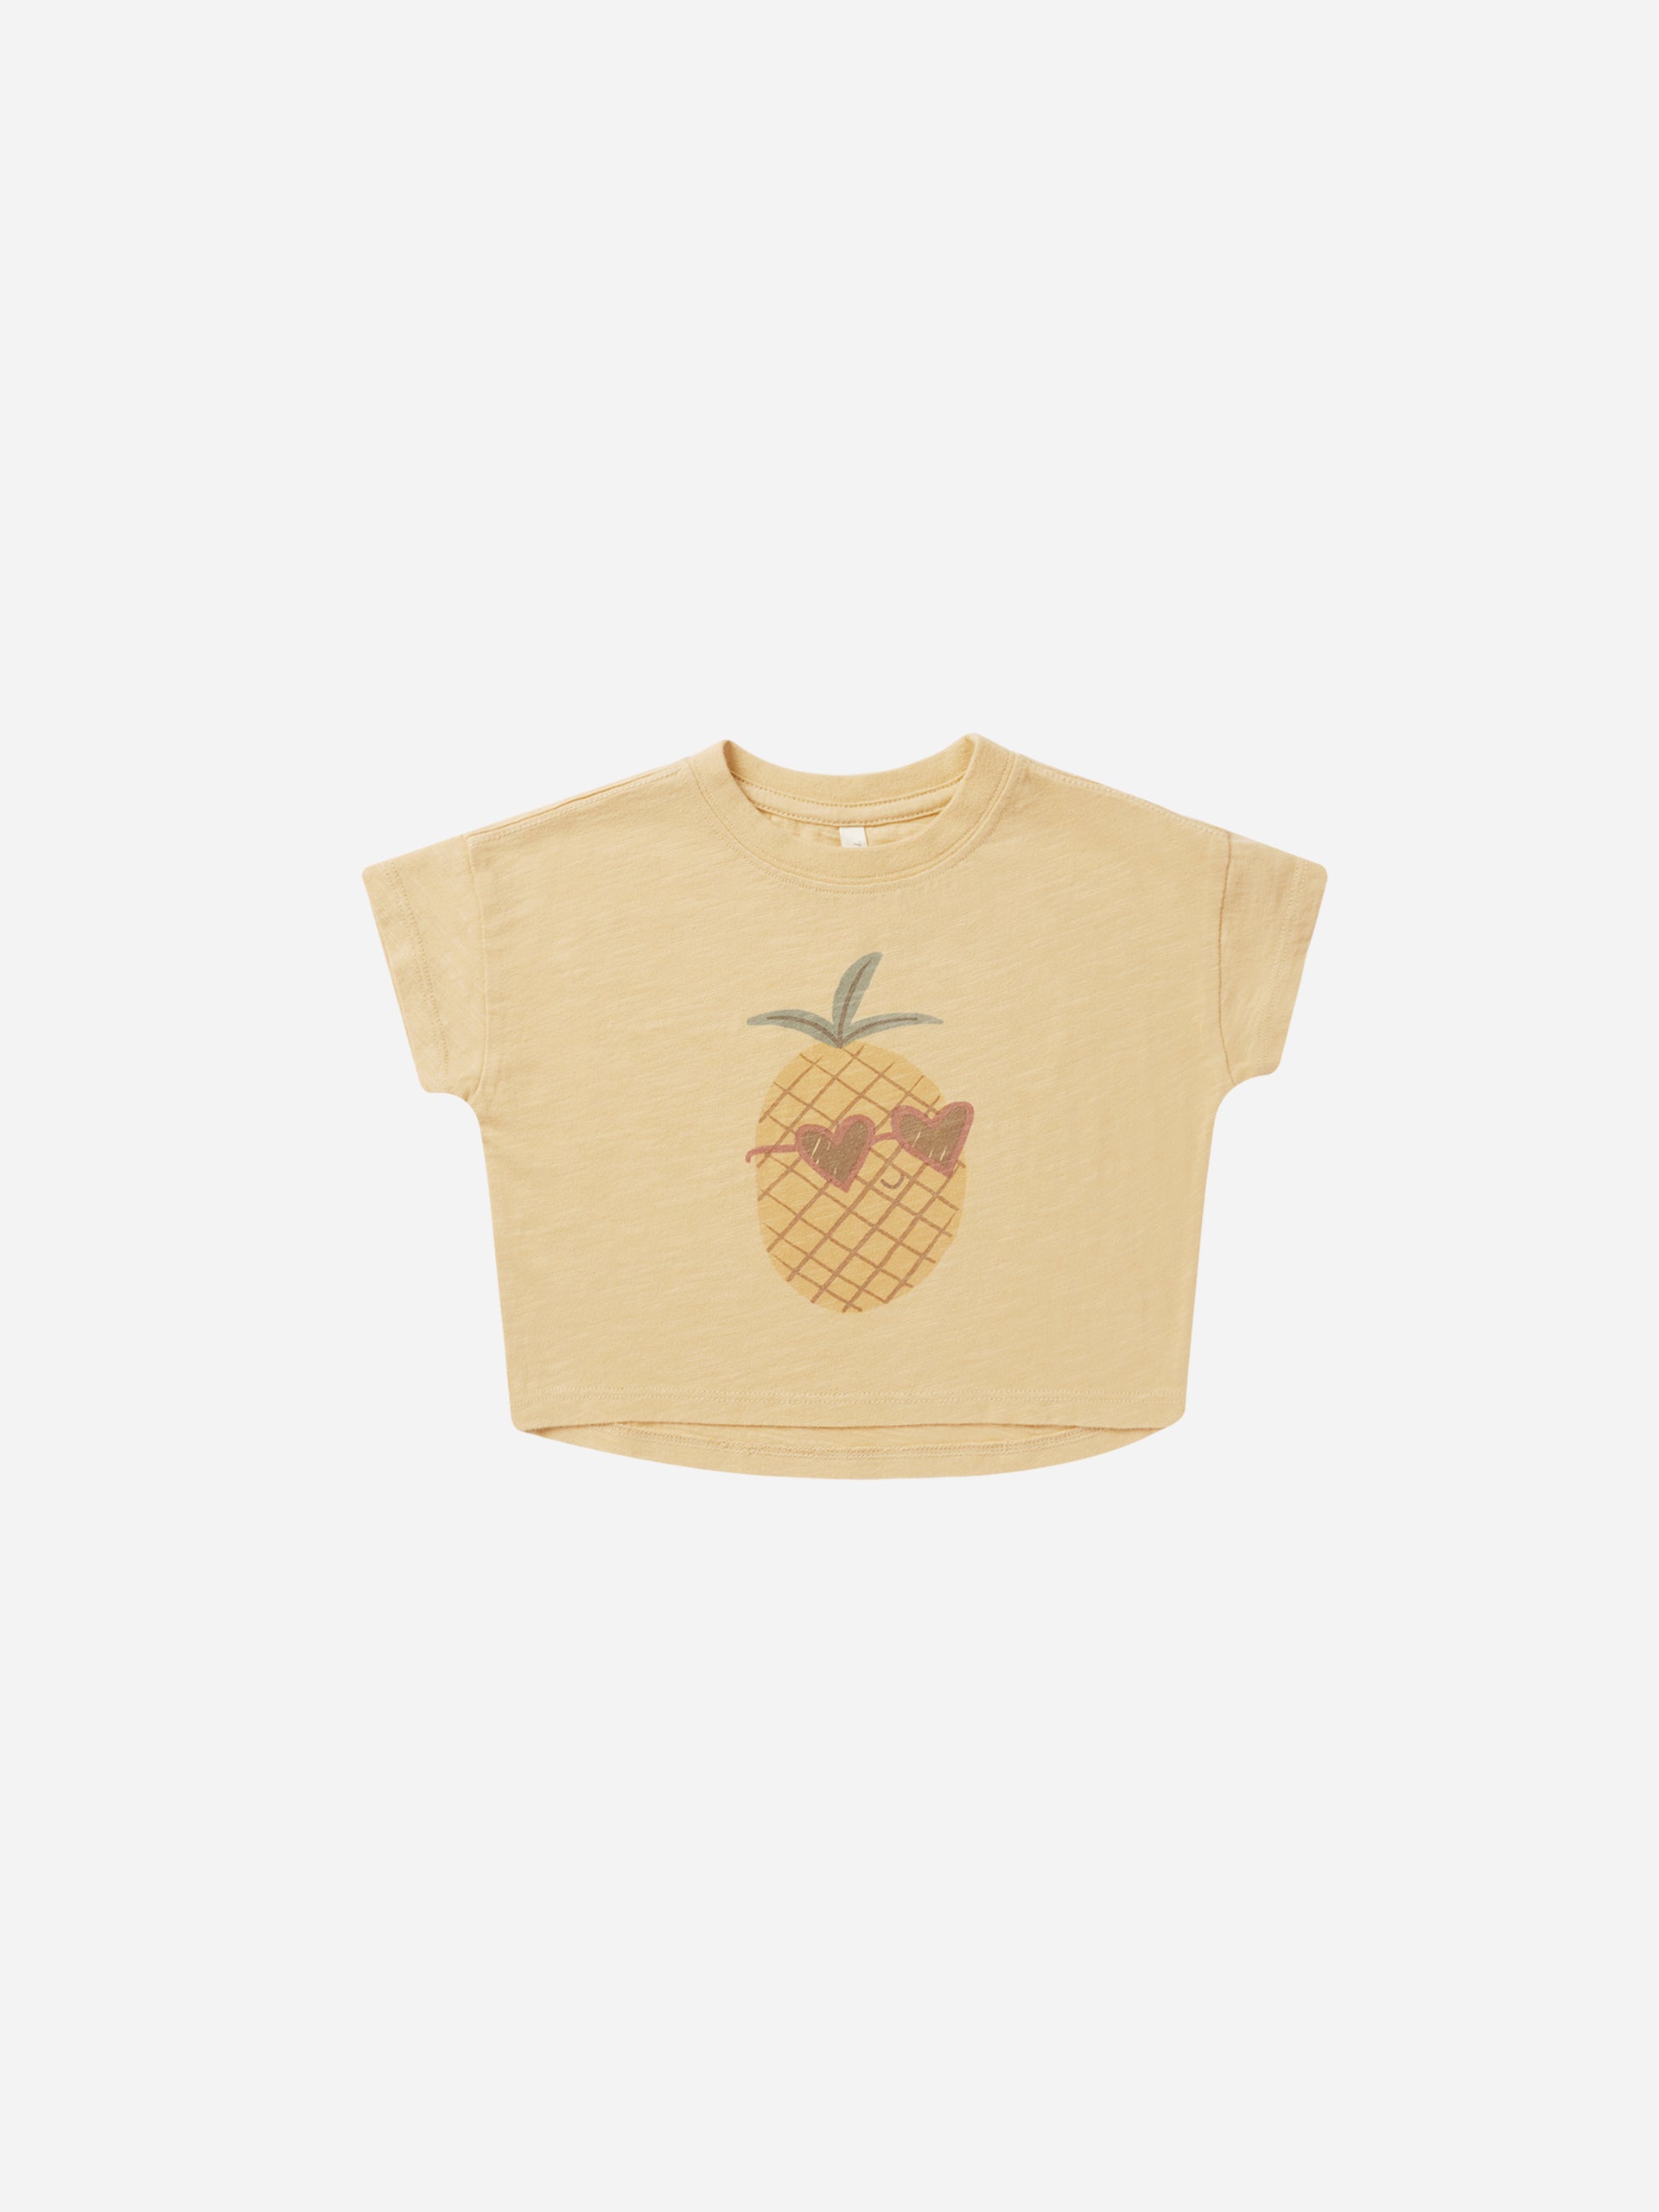 Boxy Tee || Pineapple - Rylee + Cru | Kids Clothes | Trendy Baby Clothes | Modern Infant Outfits |